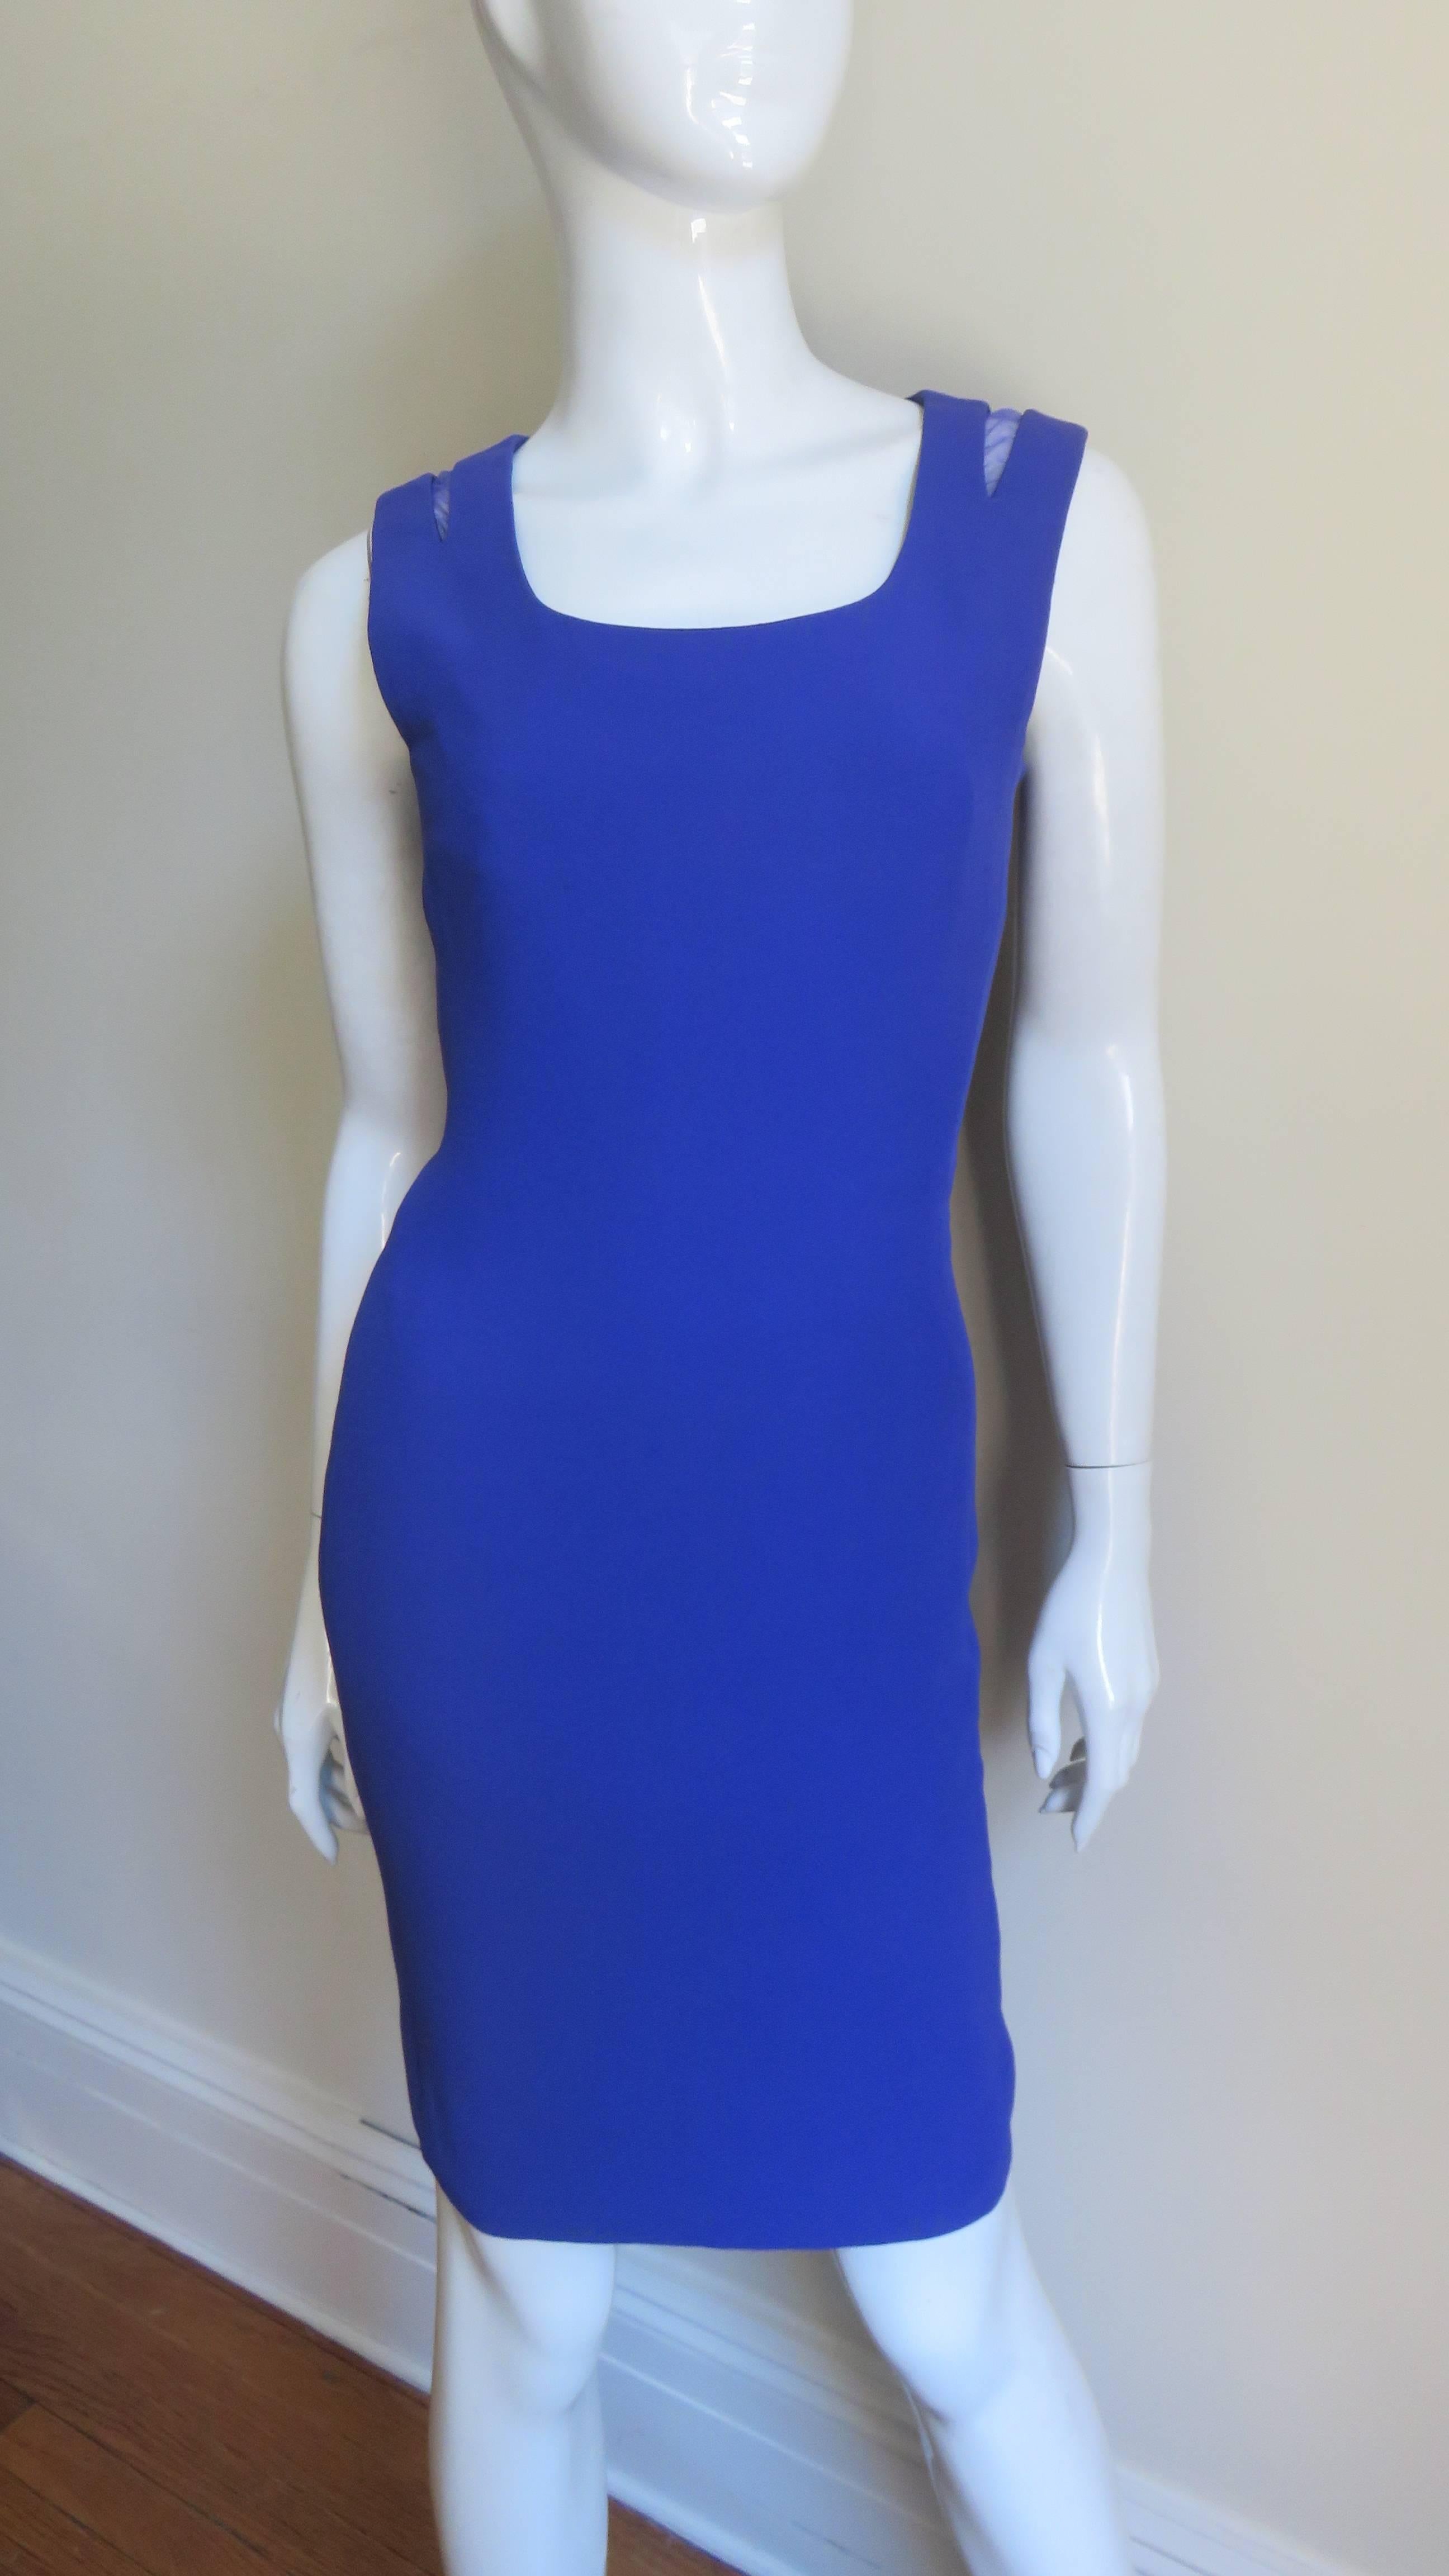 Gianni Versace Net Shoulders Bodycon Dress  In Good Condition For Sale In Water Mill, NY